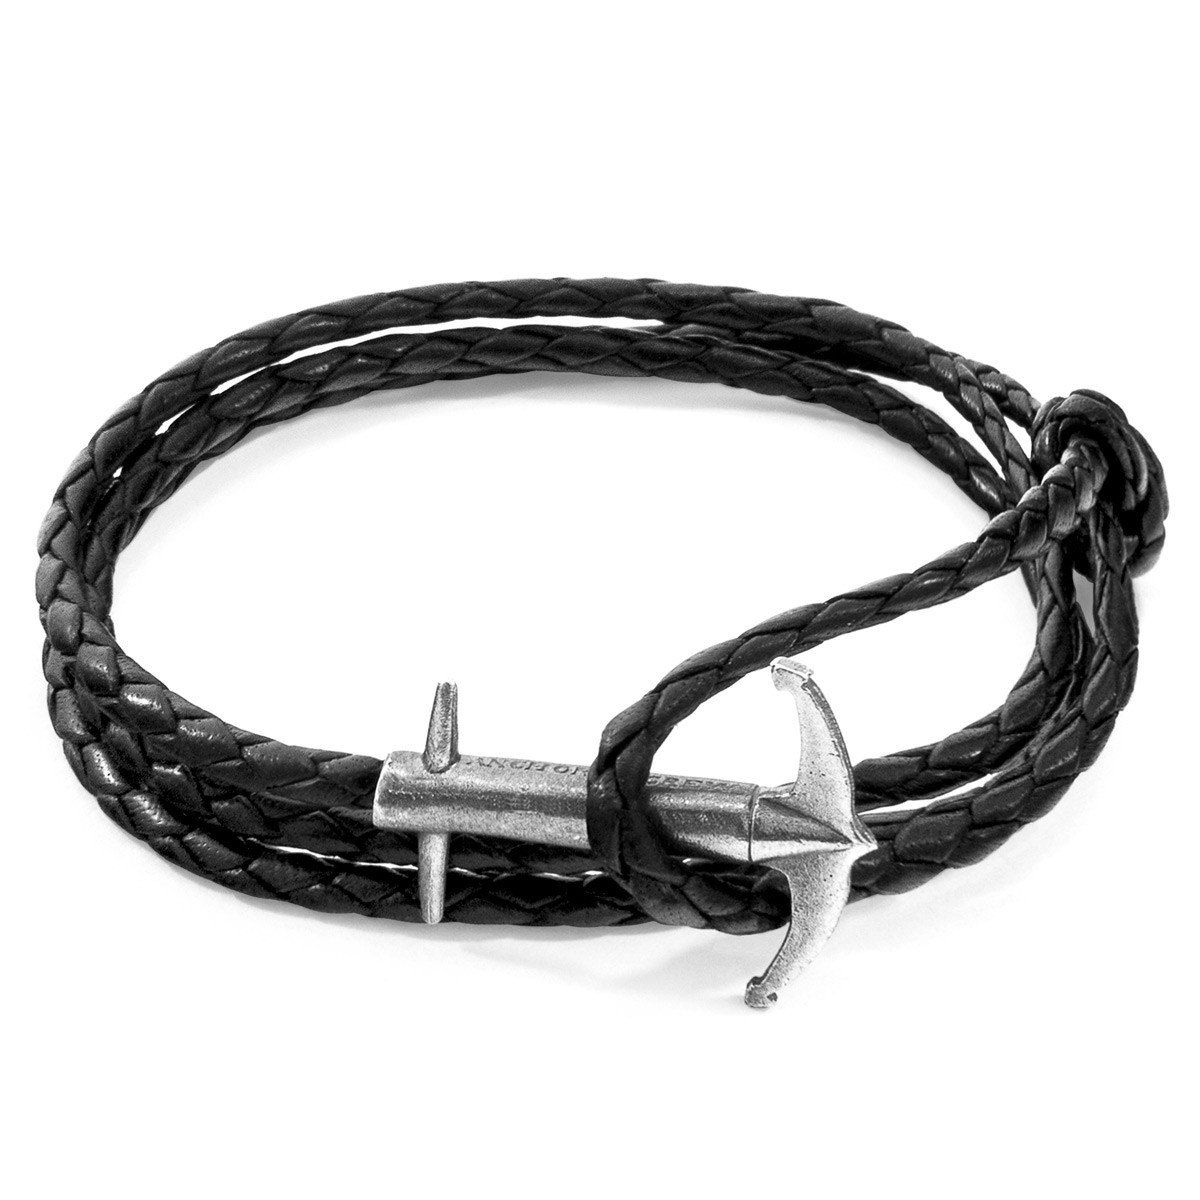 Anchor & Crew Coal Black Admiral Admiral Silver and Braided Leather Bracelet